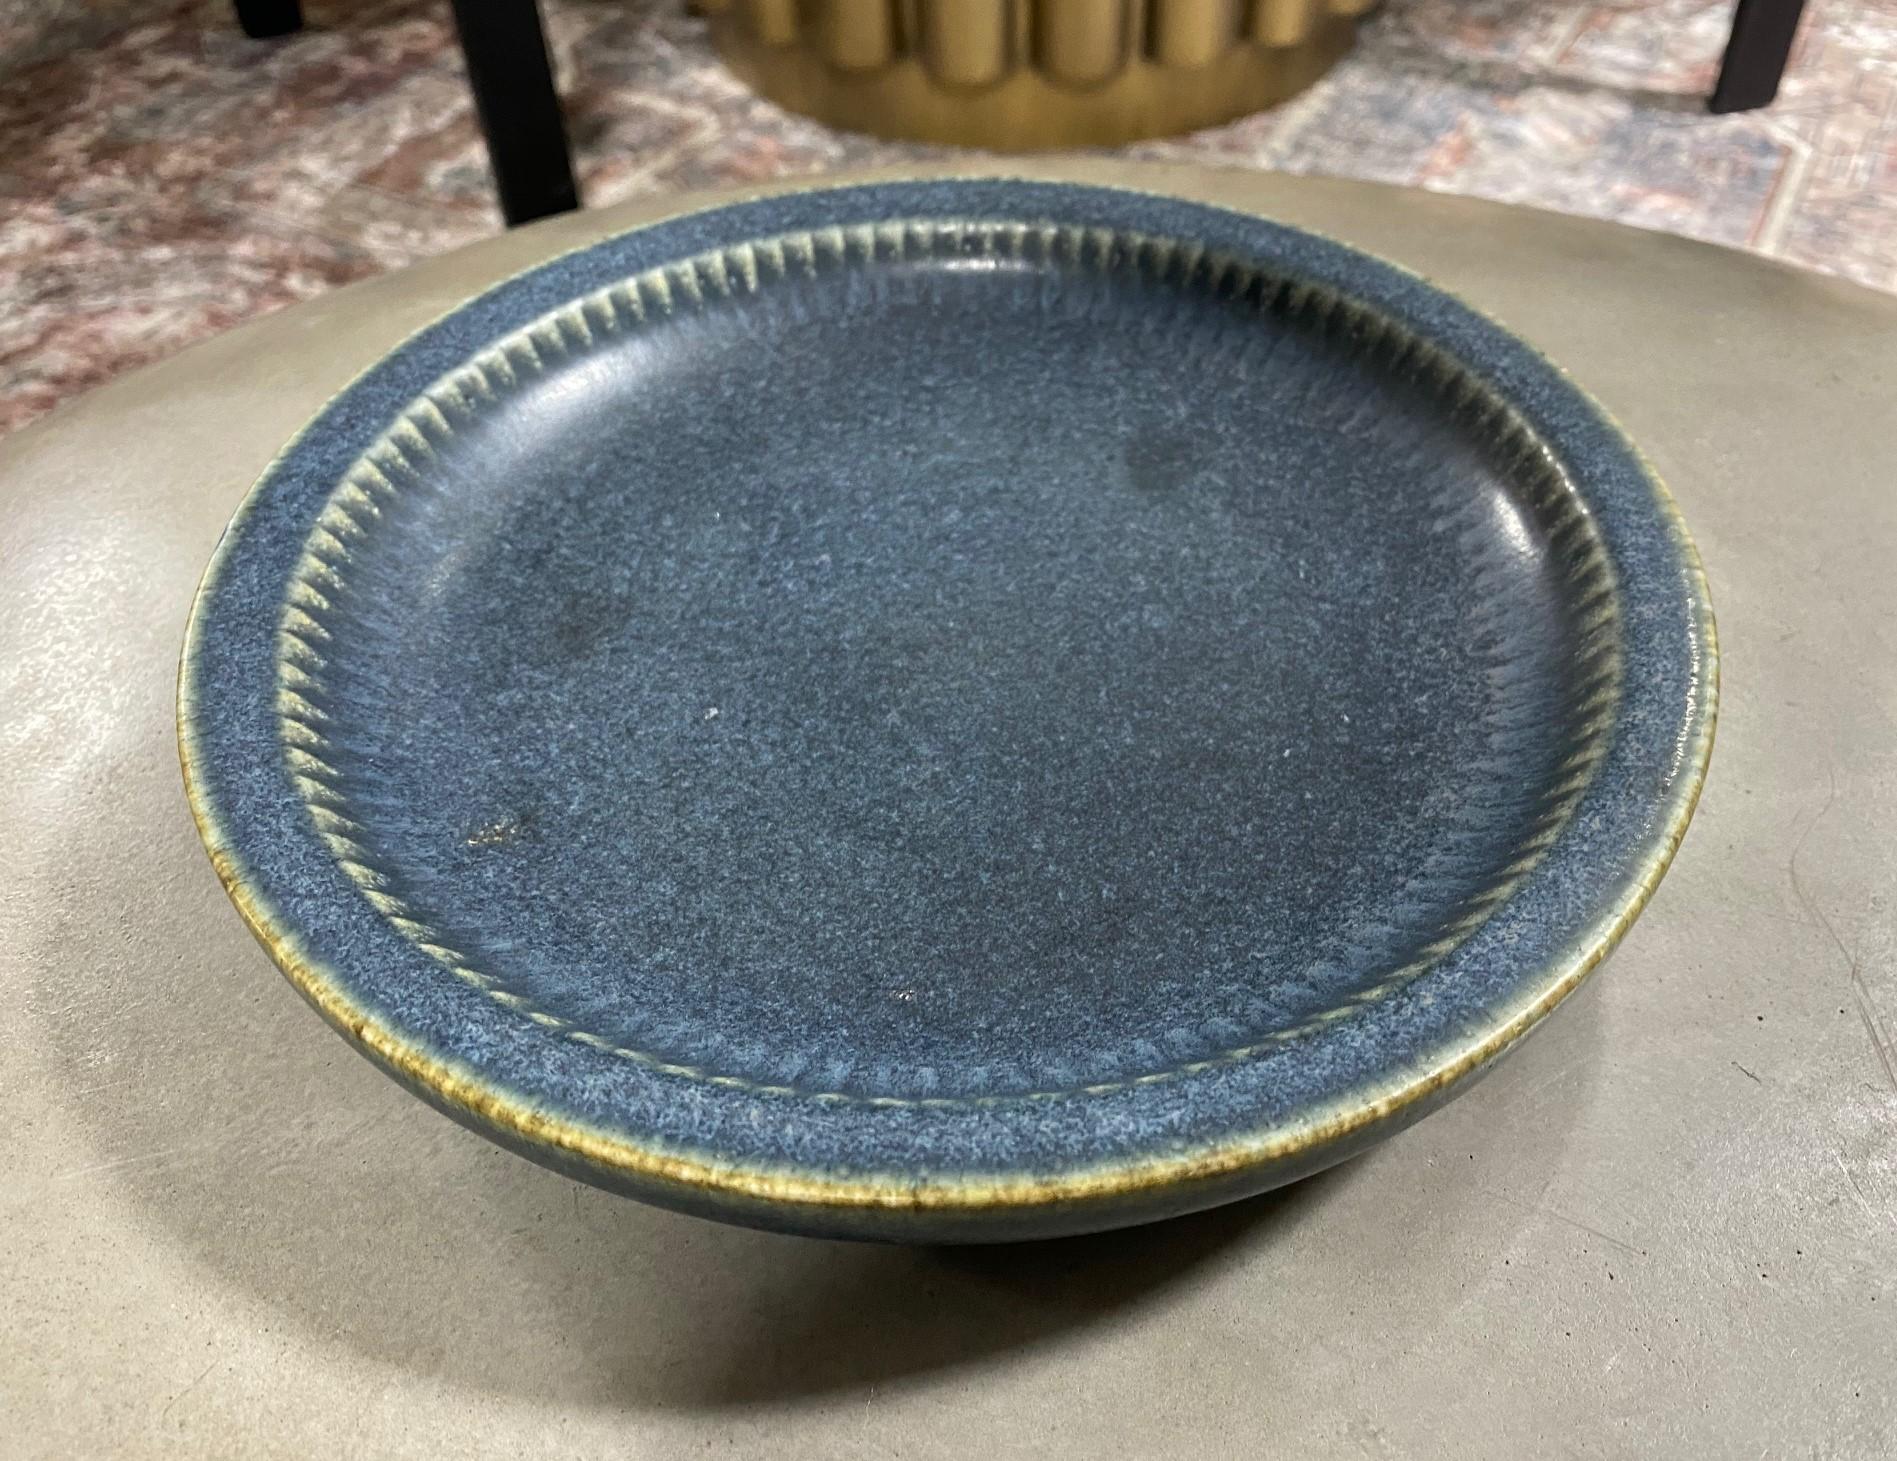 A beautifully designed, richly, and deeply blue-colored/ glazed ceramic bowl by famed Swedish designer Carl-Harry Stålhane for Rörstrand, Sweeden. The craftsmanship and color are stunning.

Carl-Harry Stalhane (1920-90) was one of the leading